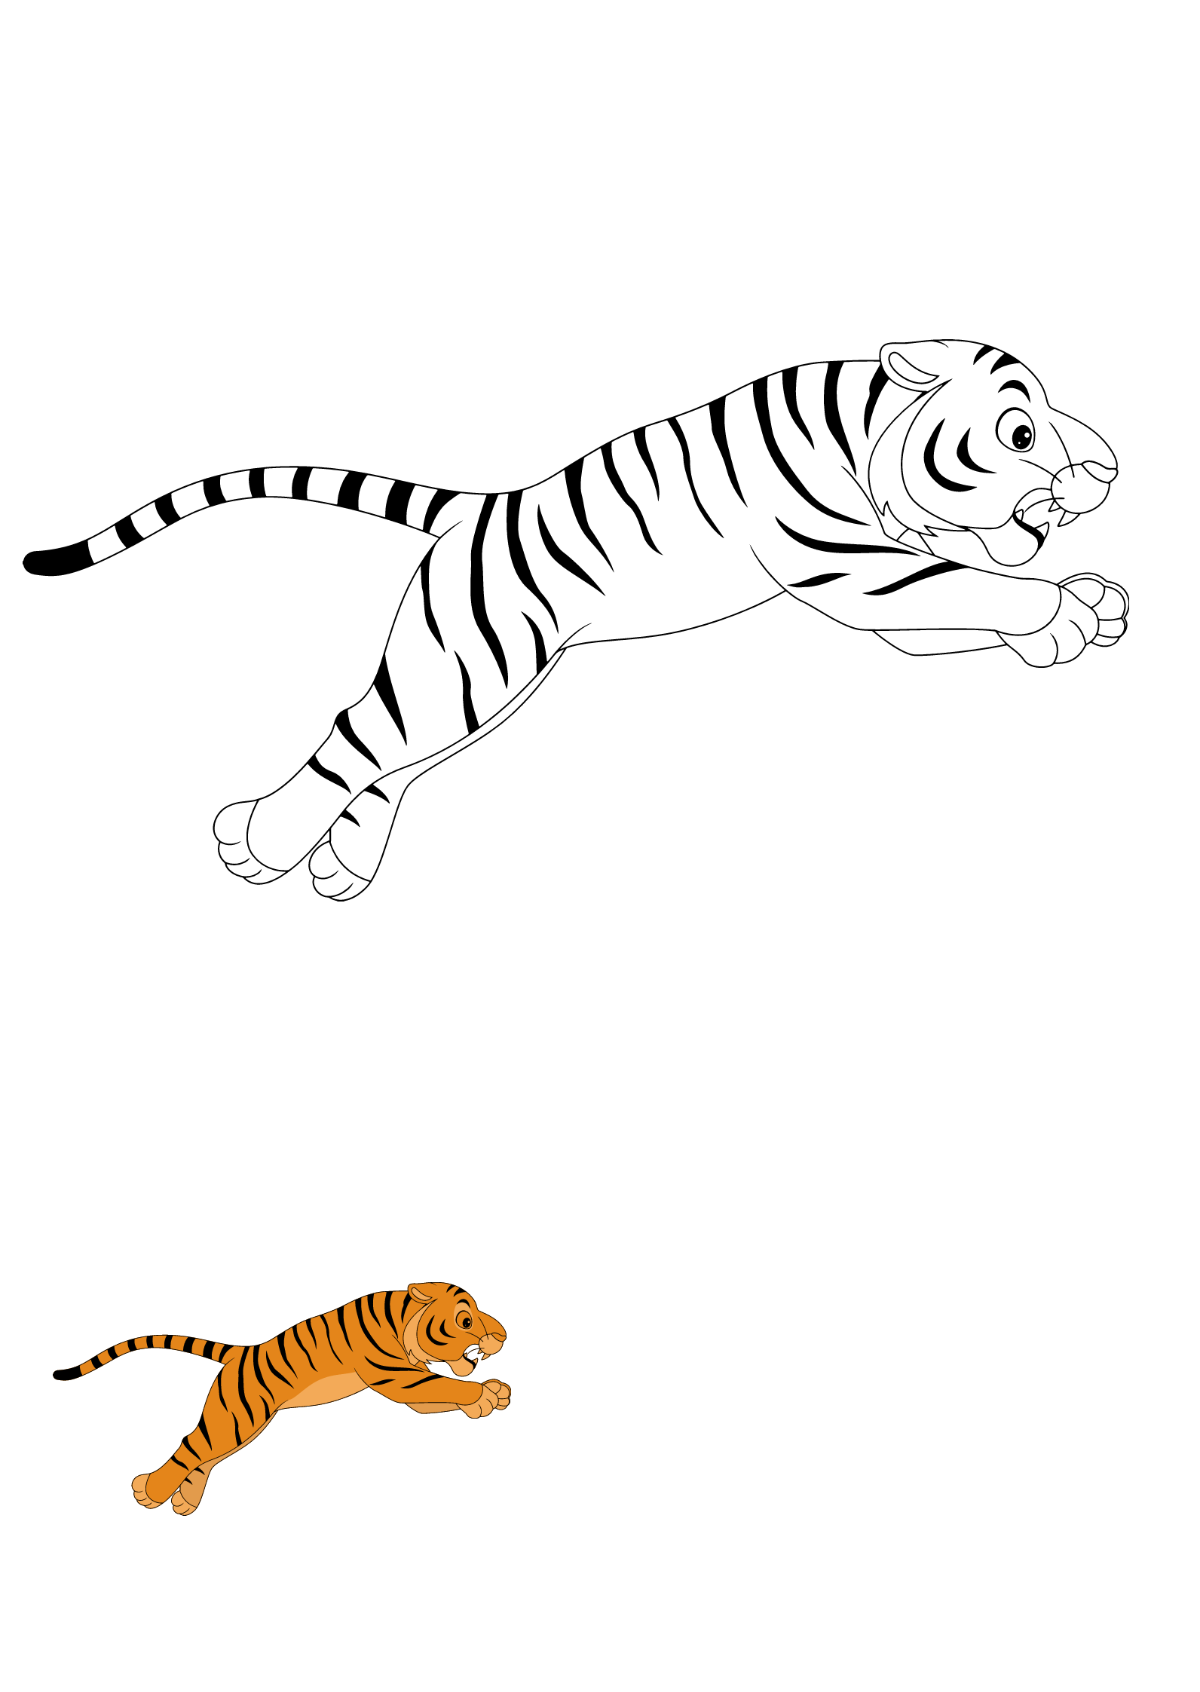 Simple Tiger Coloring Page Template